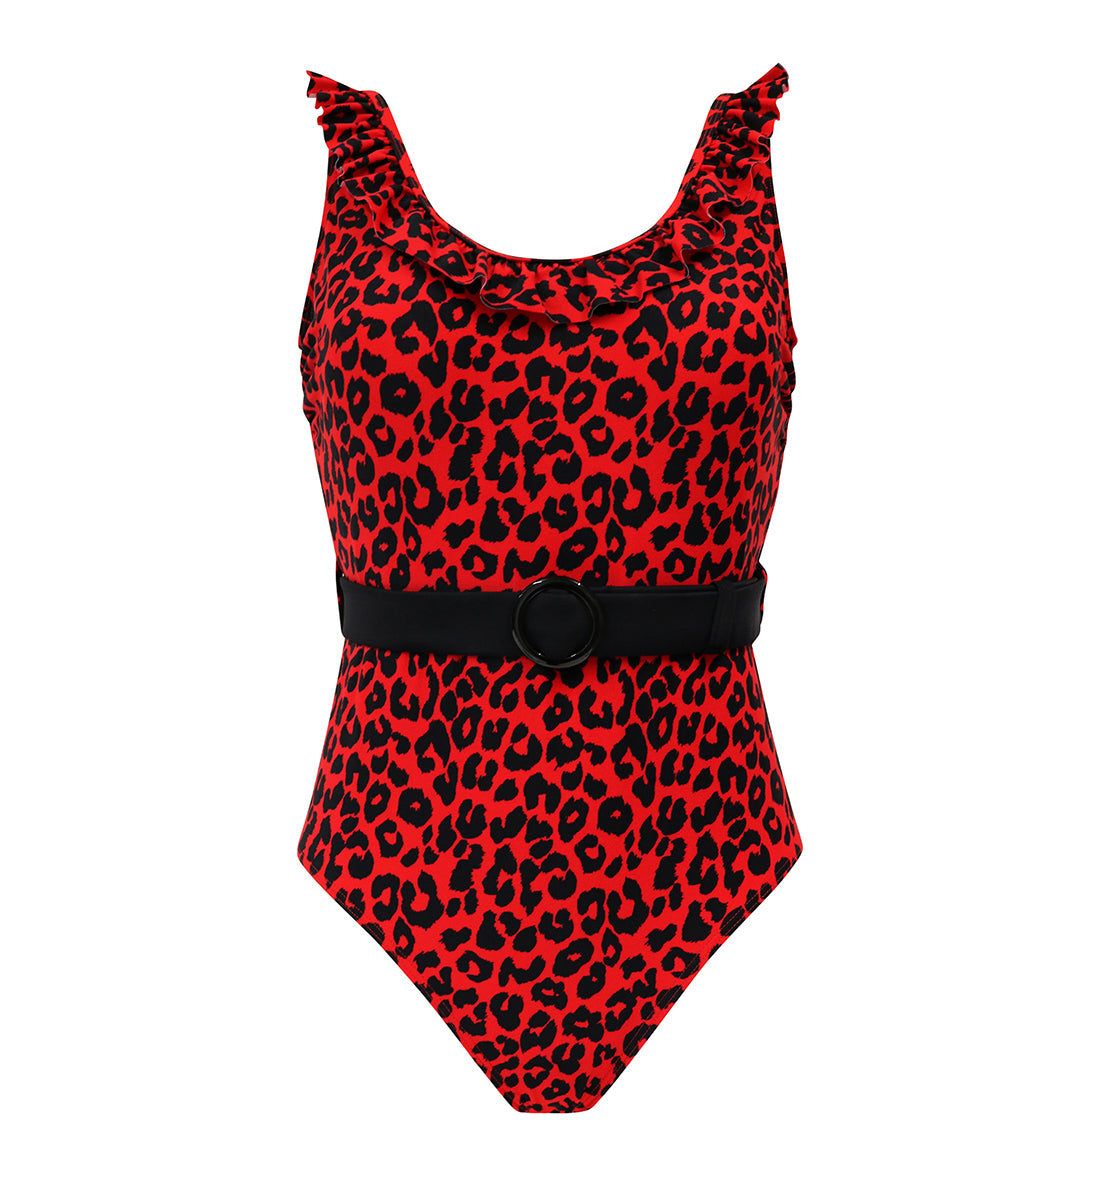 Pour Moi Frill Neck Belted Control Swimsuit (25604),XS,Red Leopard - Red Leopard,XS